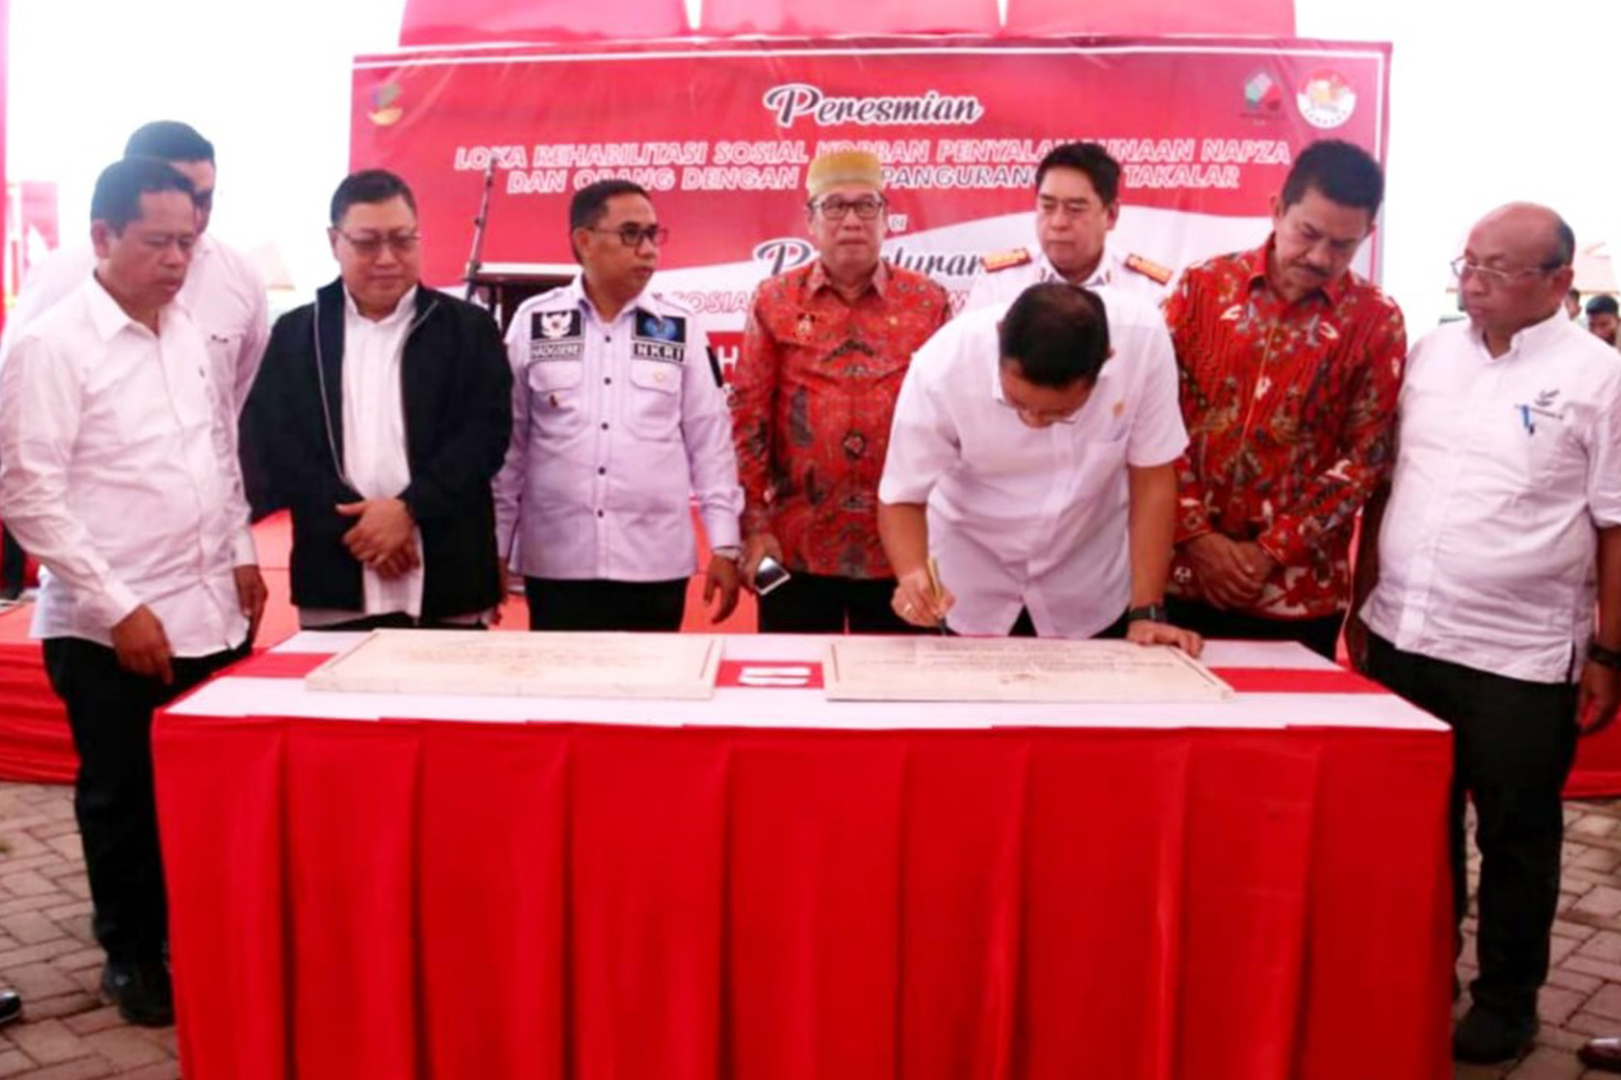 Minister of Social Affairs Inaugurates the National Institute for Inclusion of Indonesian Support